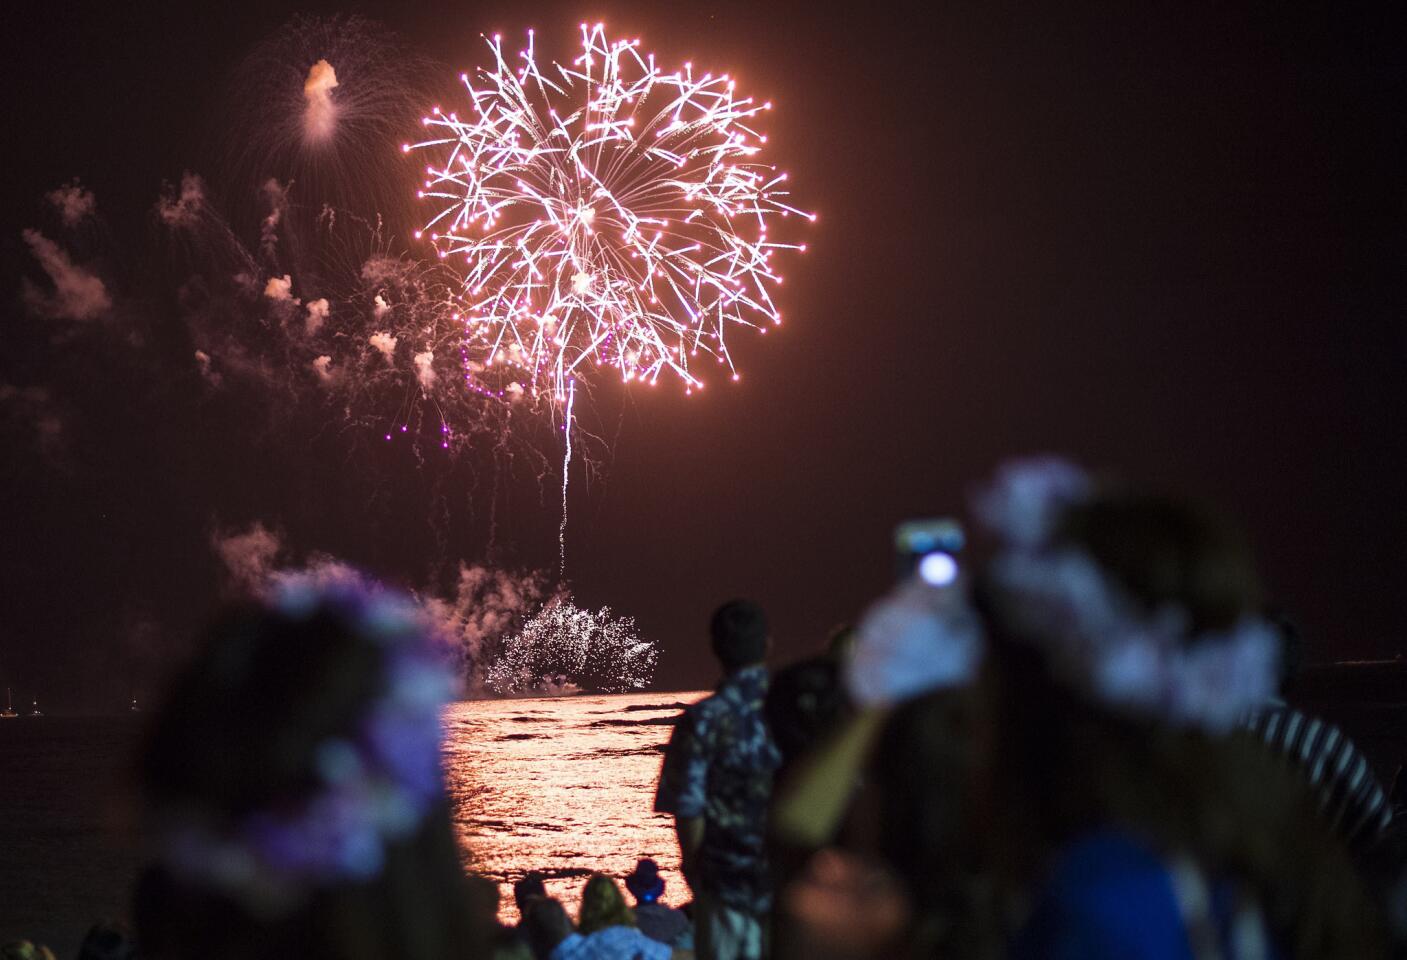 People watch a New Year's fireworks display on Waikiki beach. President Barack Obama, still on vacation in Hawaii, plans to spend New Year's Eve with loved ones "at home," the White House said.